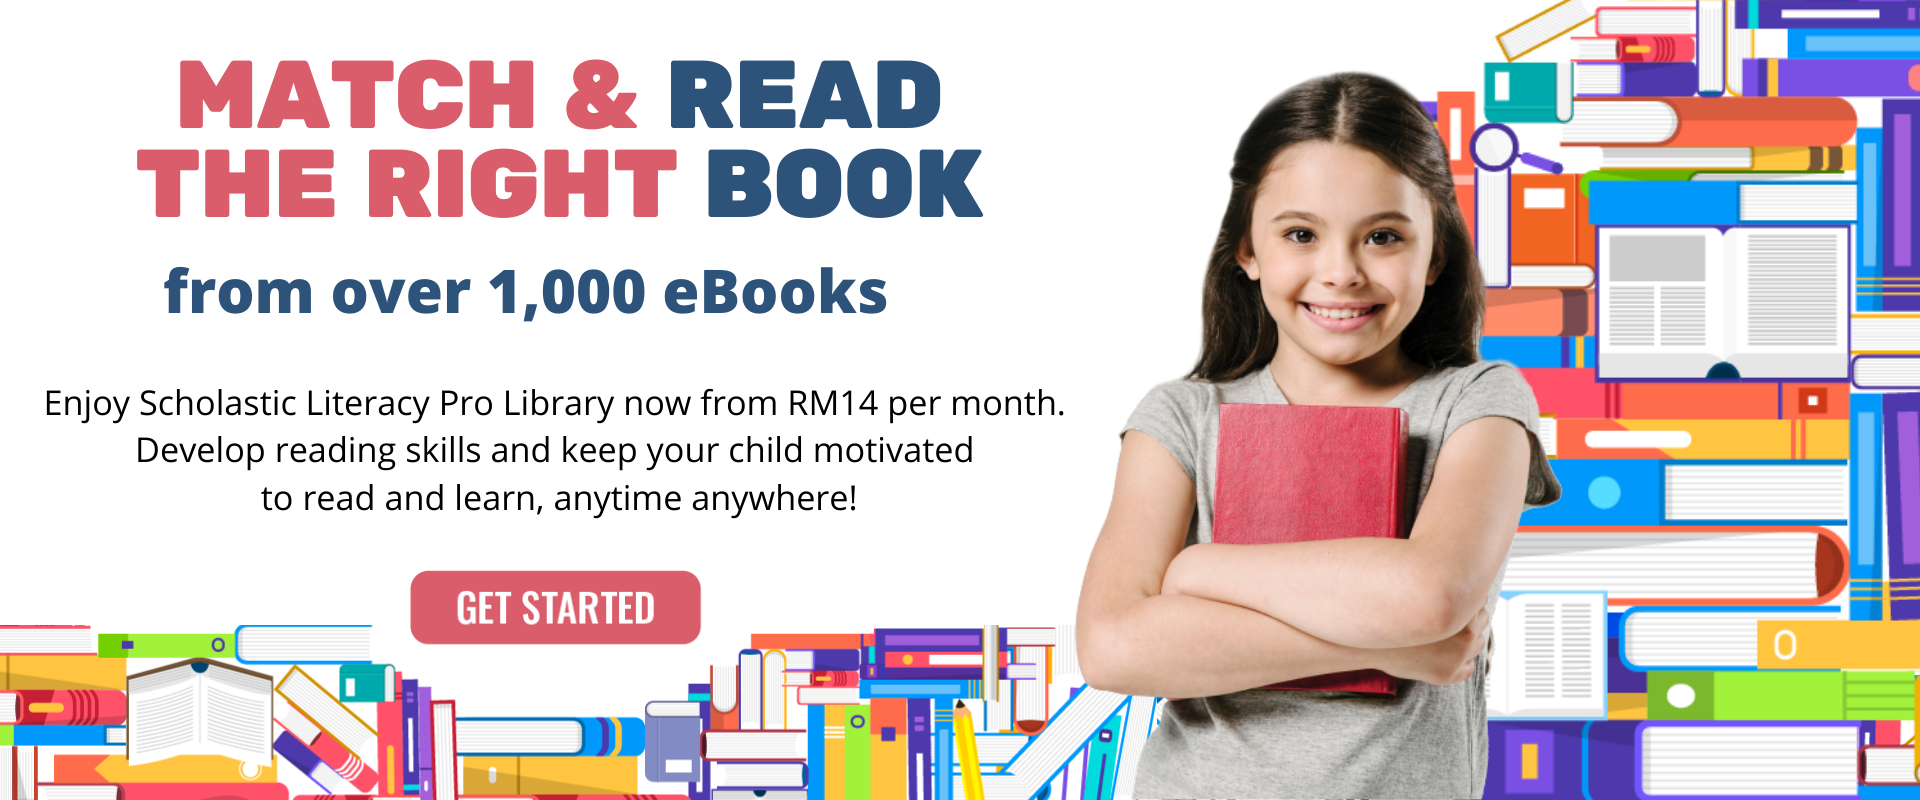 unlimited reading_scholastic literacy pro library_edureviews